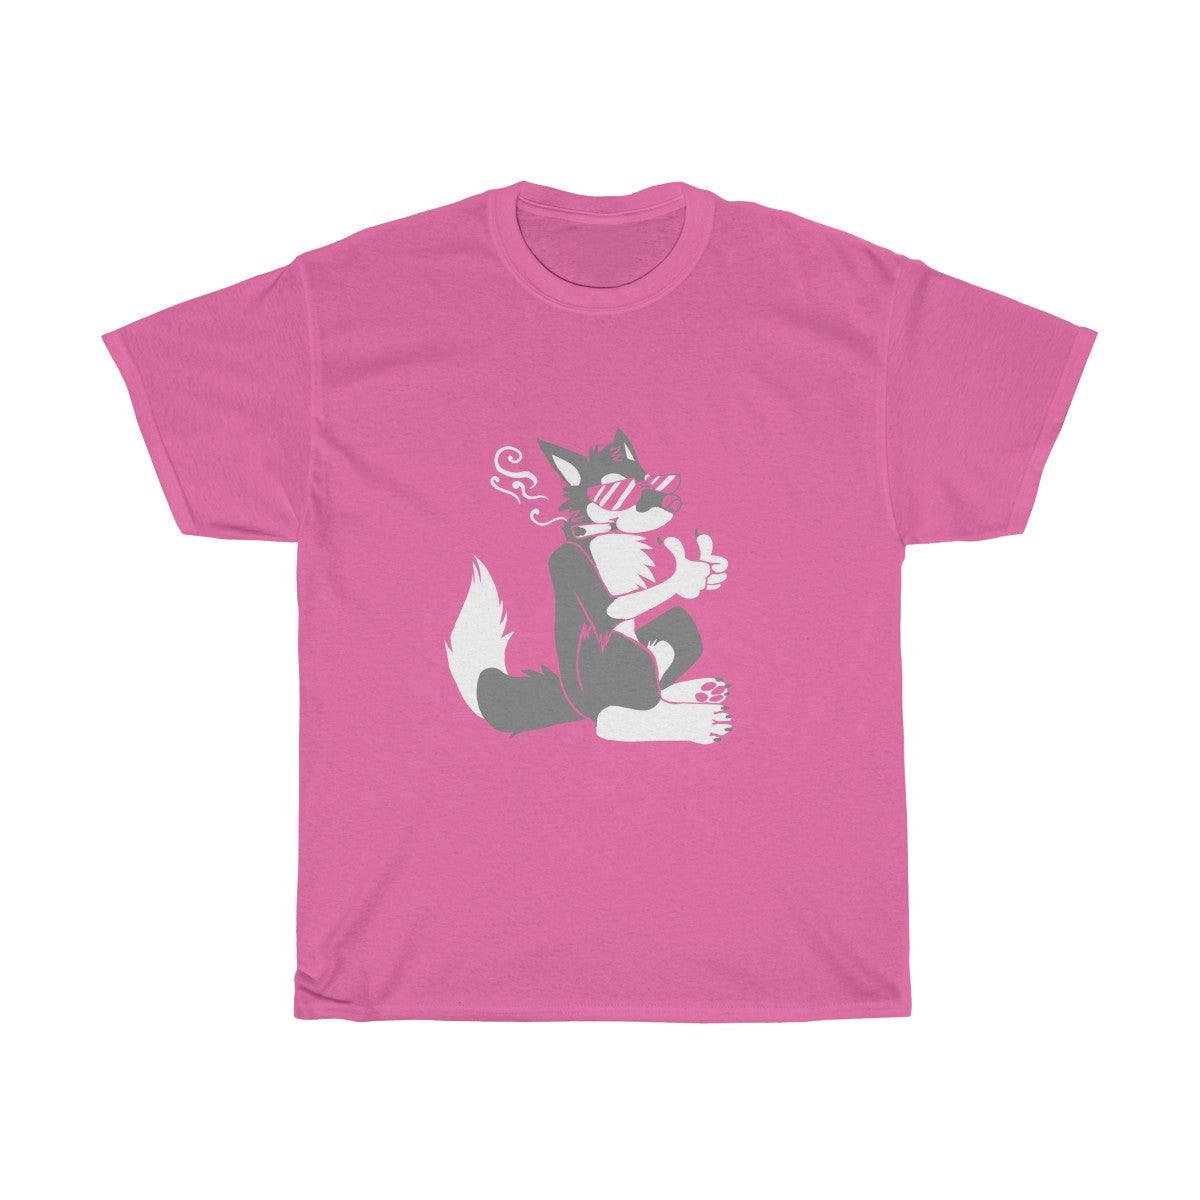 Chill Out - T-Shirt T-Shirt Dire Creatures Pink S 